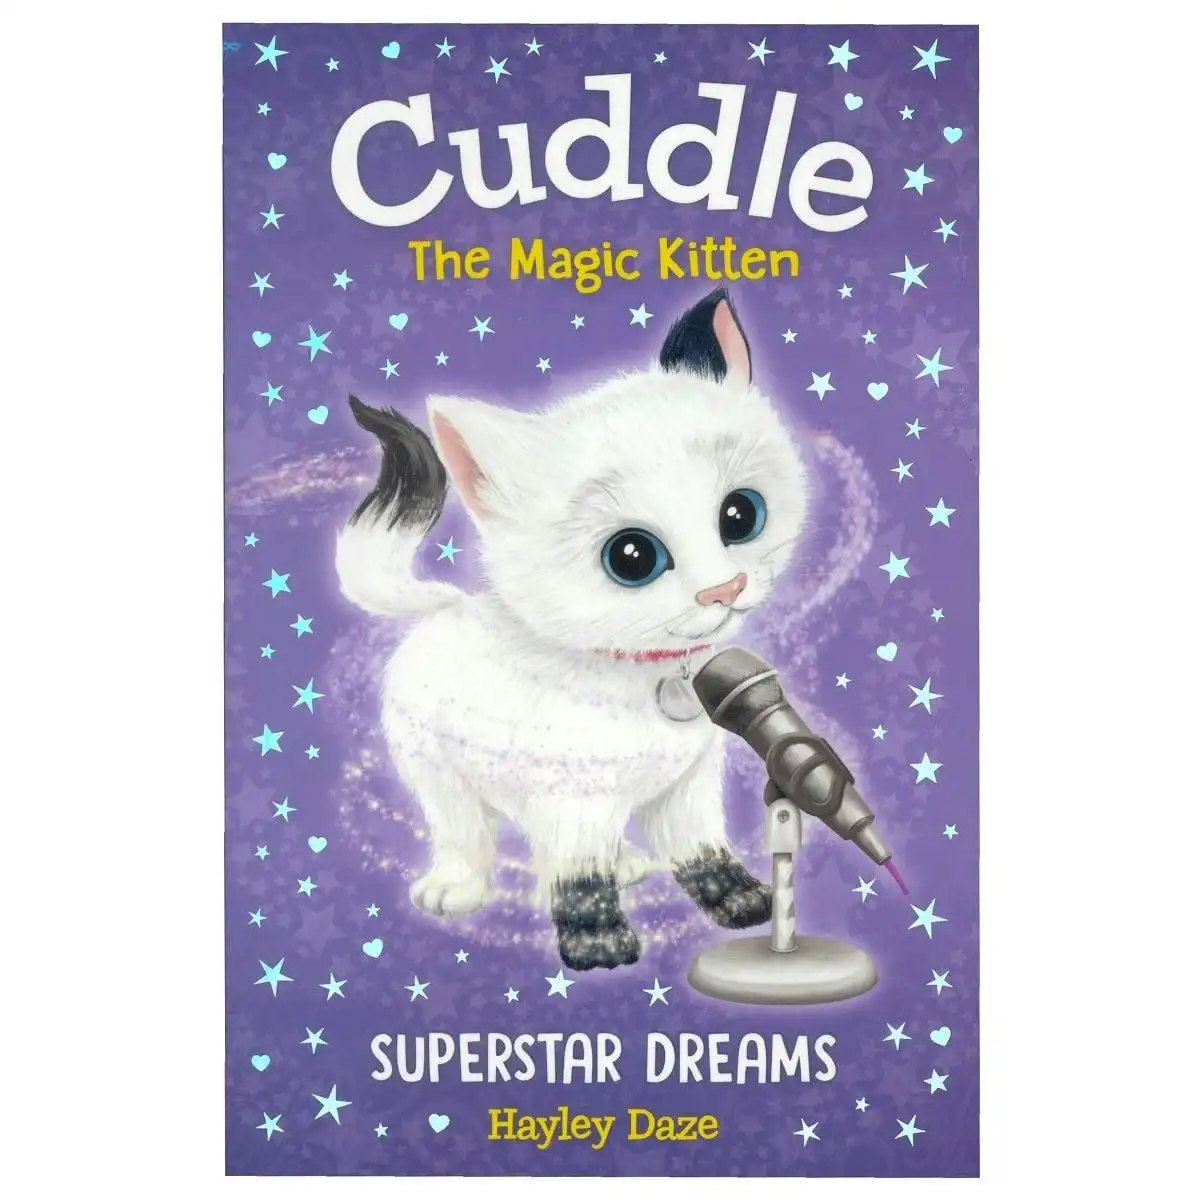 Promotional Cuddle The Magic Kitten: Superstar Dreams